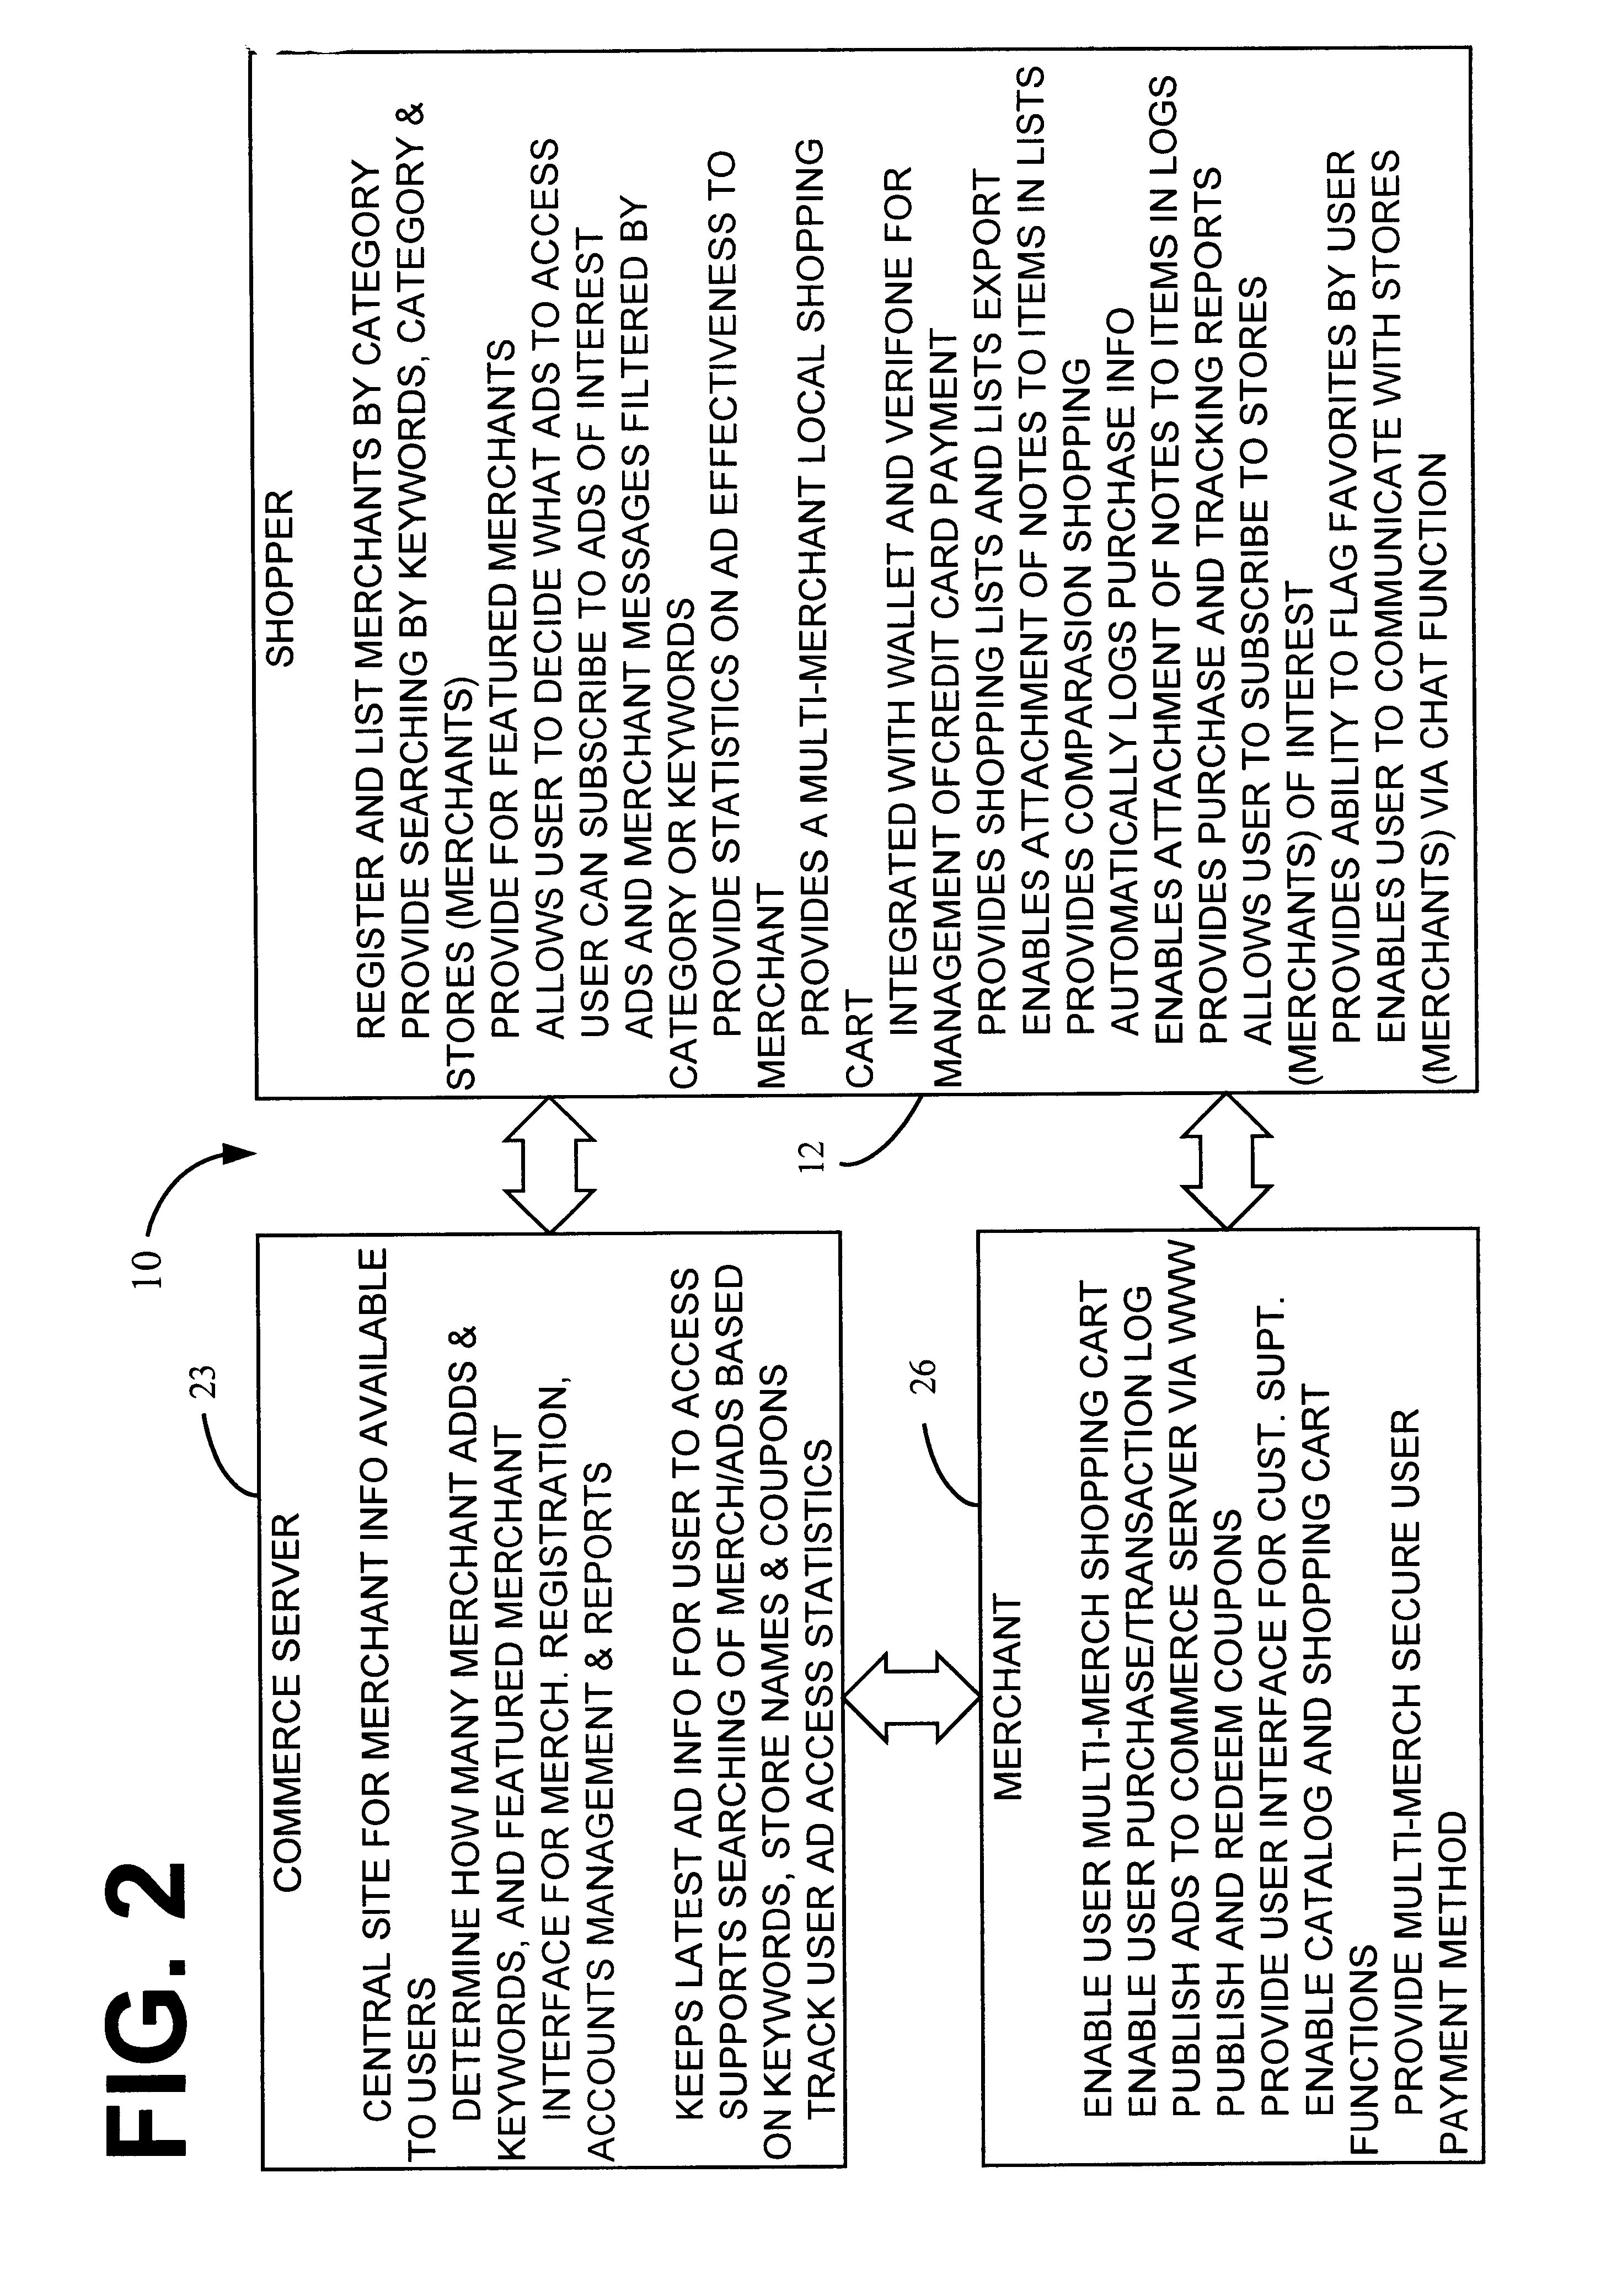 System and method for creating and sharing purchasing lists on a network